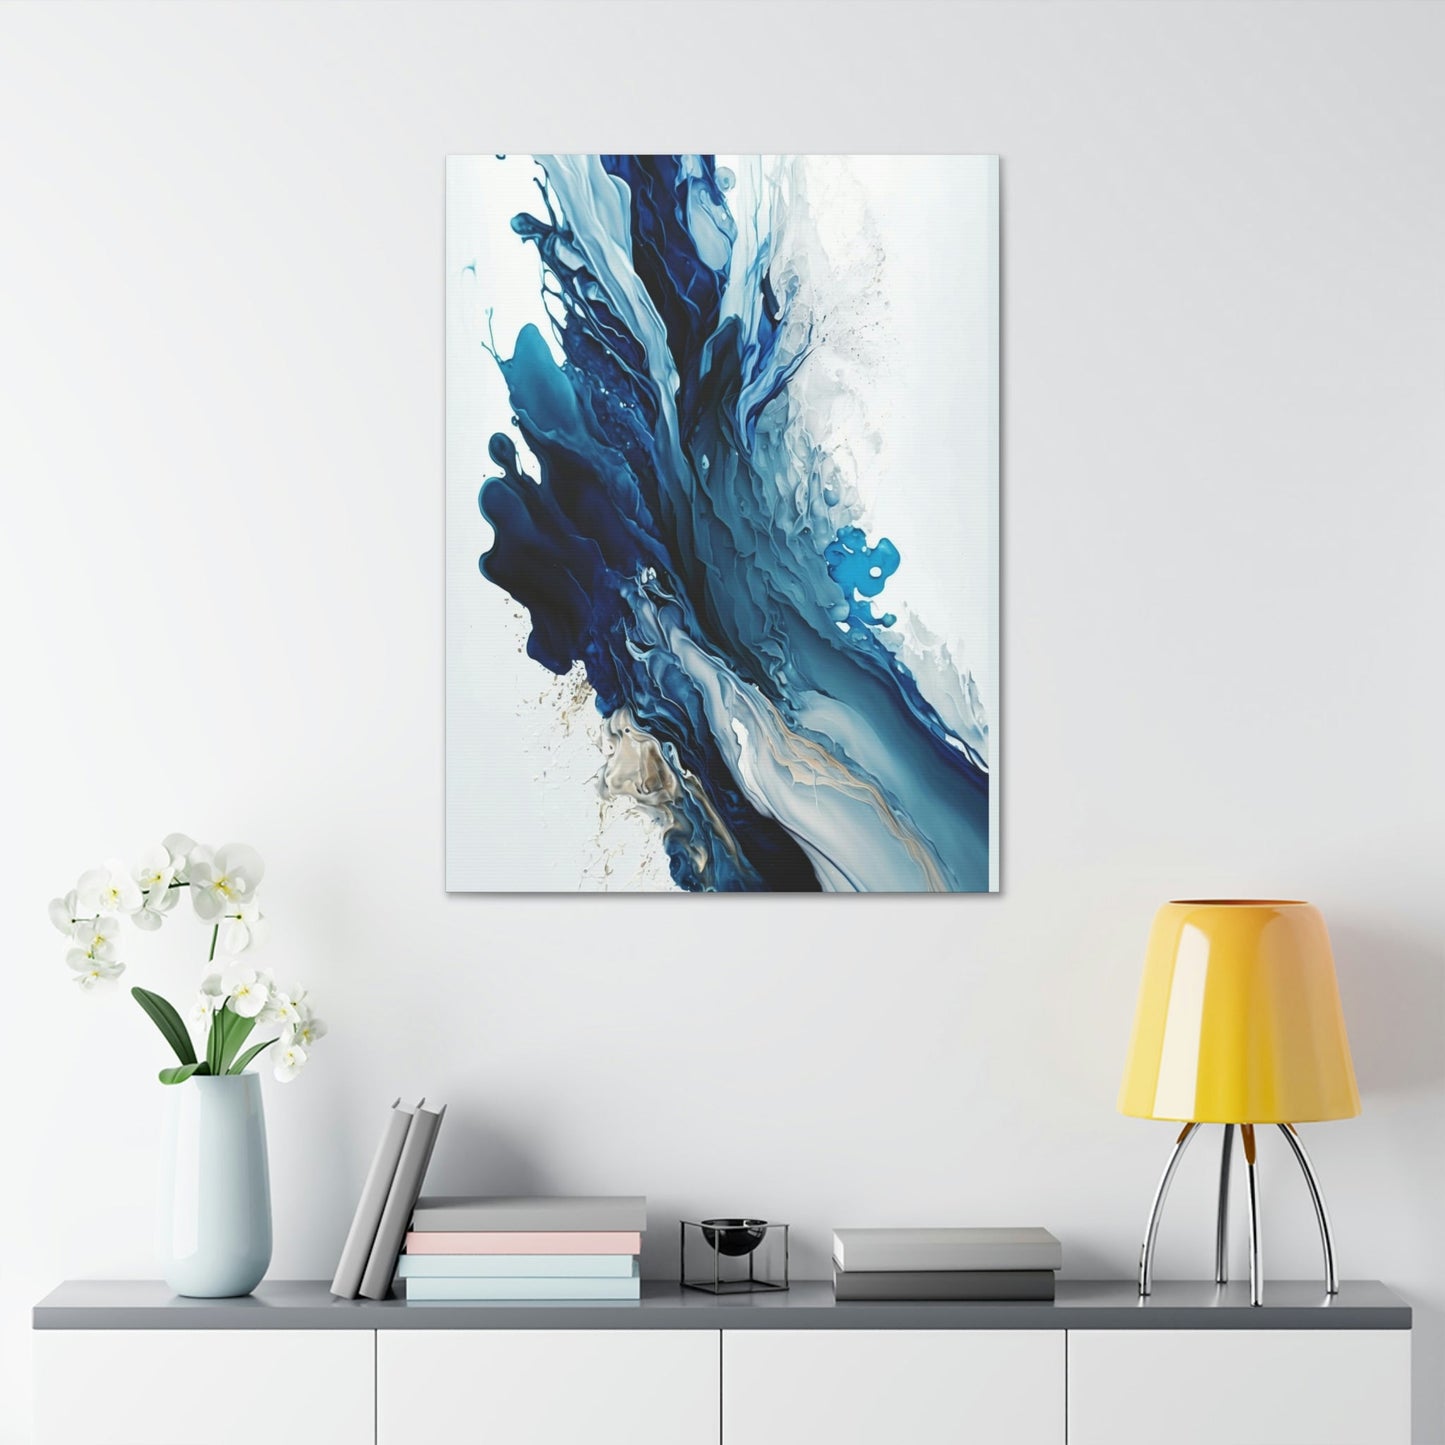 Blue Harmony: A Framed Poster & Canvas Print of a Blue and White Abstract Artwork